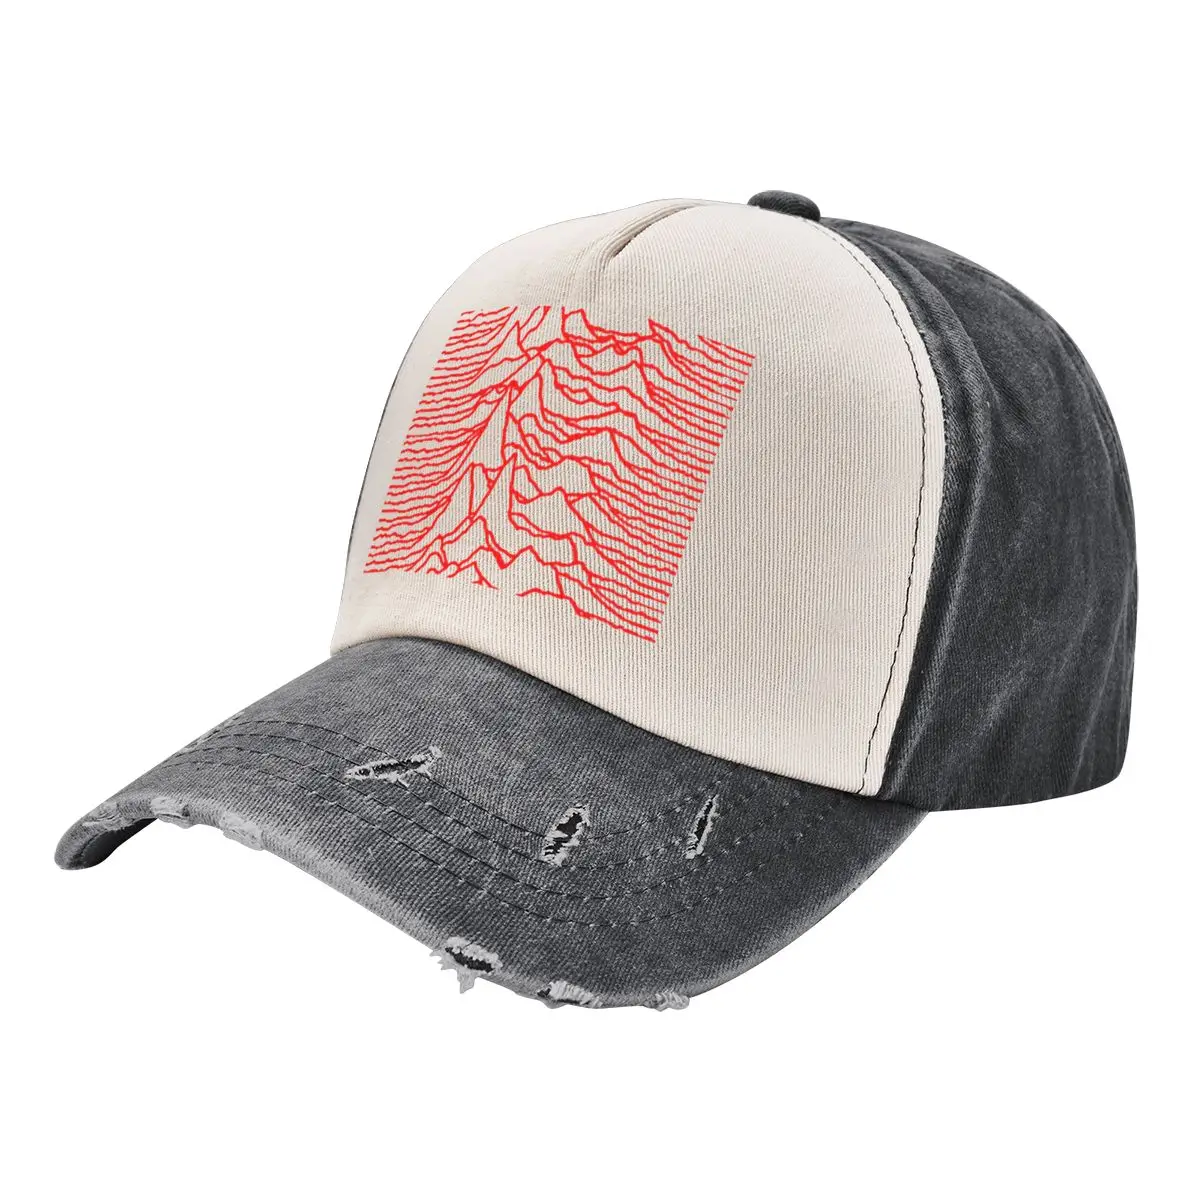 

Unknown Waves in Red Baseball Cap Big Size Hat sun hat Mountaineering Beach Girl'S Hats Men's